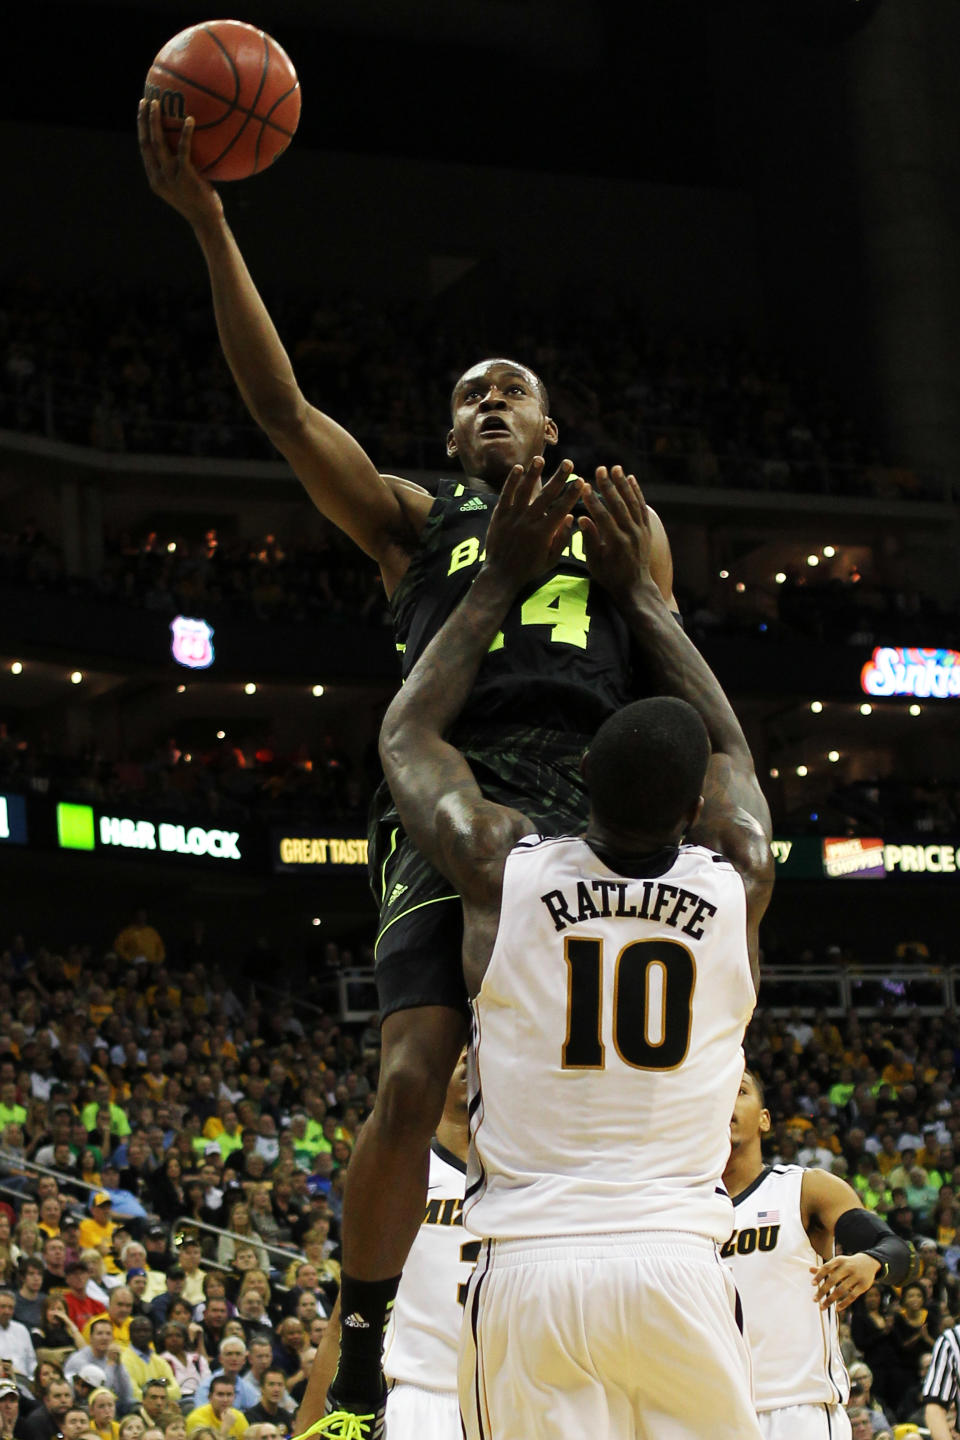 KANSAS CITY, MO - MARCH 10: Deuce Bello #14 of the Baylor Bears shoots over Ricardo Ratliffe #10 of the Missouri Tigers in the second half during the championship game of the 2012 Big 12 Men's Basketball Tournament at Sprint Center on March 10, 2012 in Kansas City, Missouri. (Photo by Jamie Squire/Getty Images)